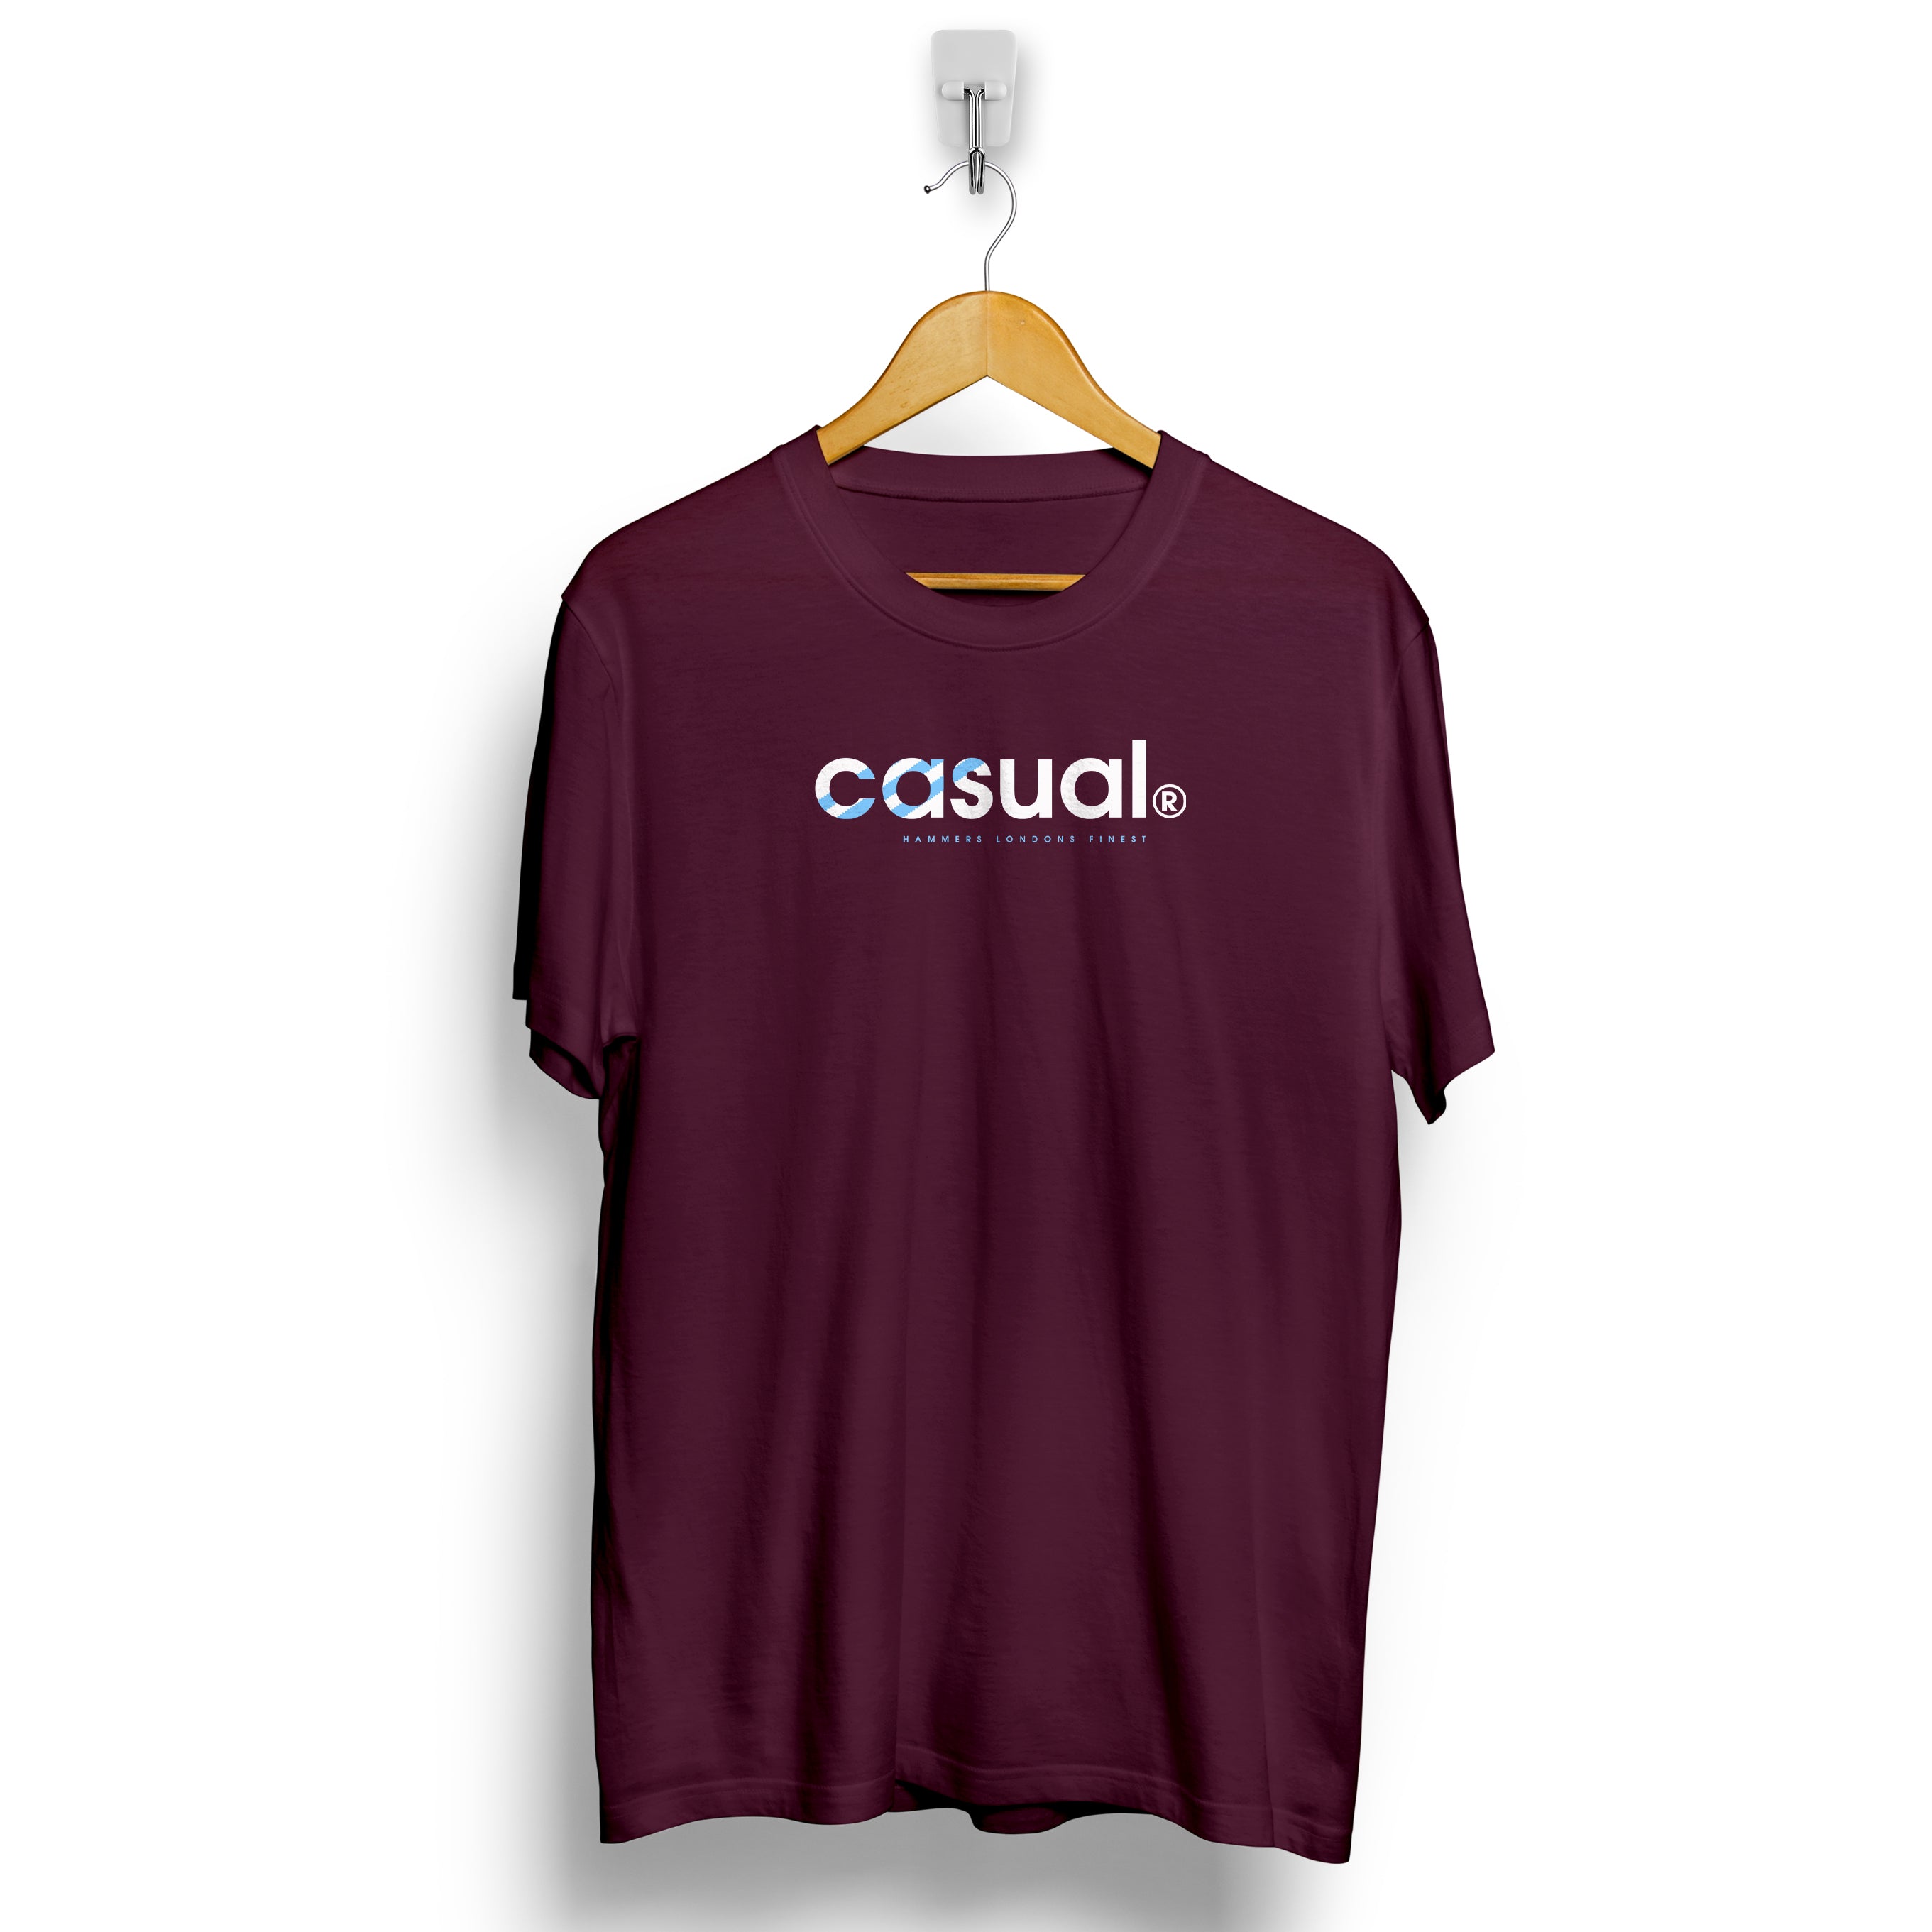 Casual Hammers London's Finest Football Casuals 80s Dressers Subculture T Shirt